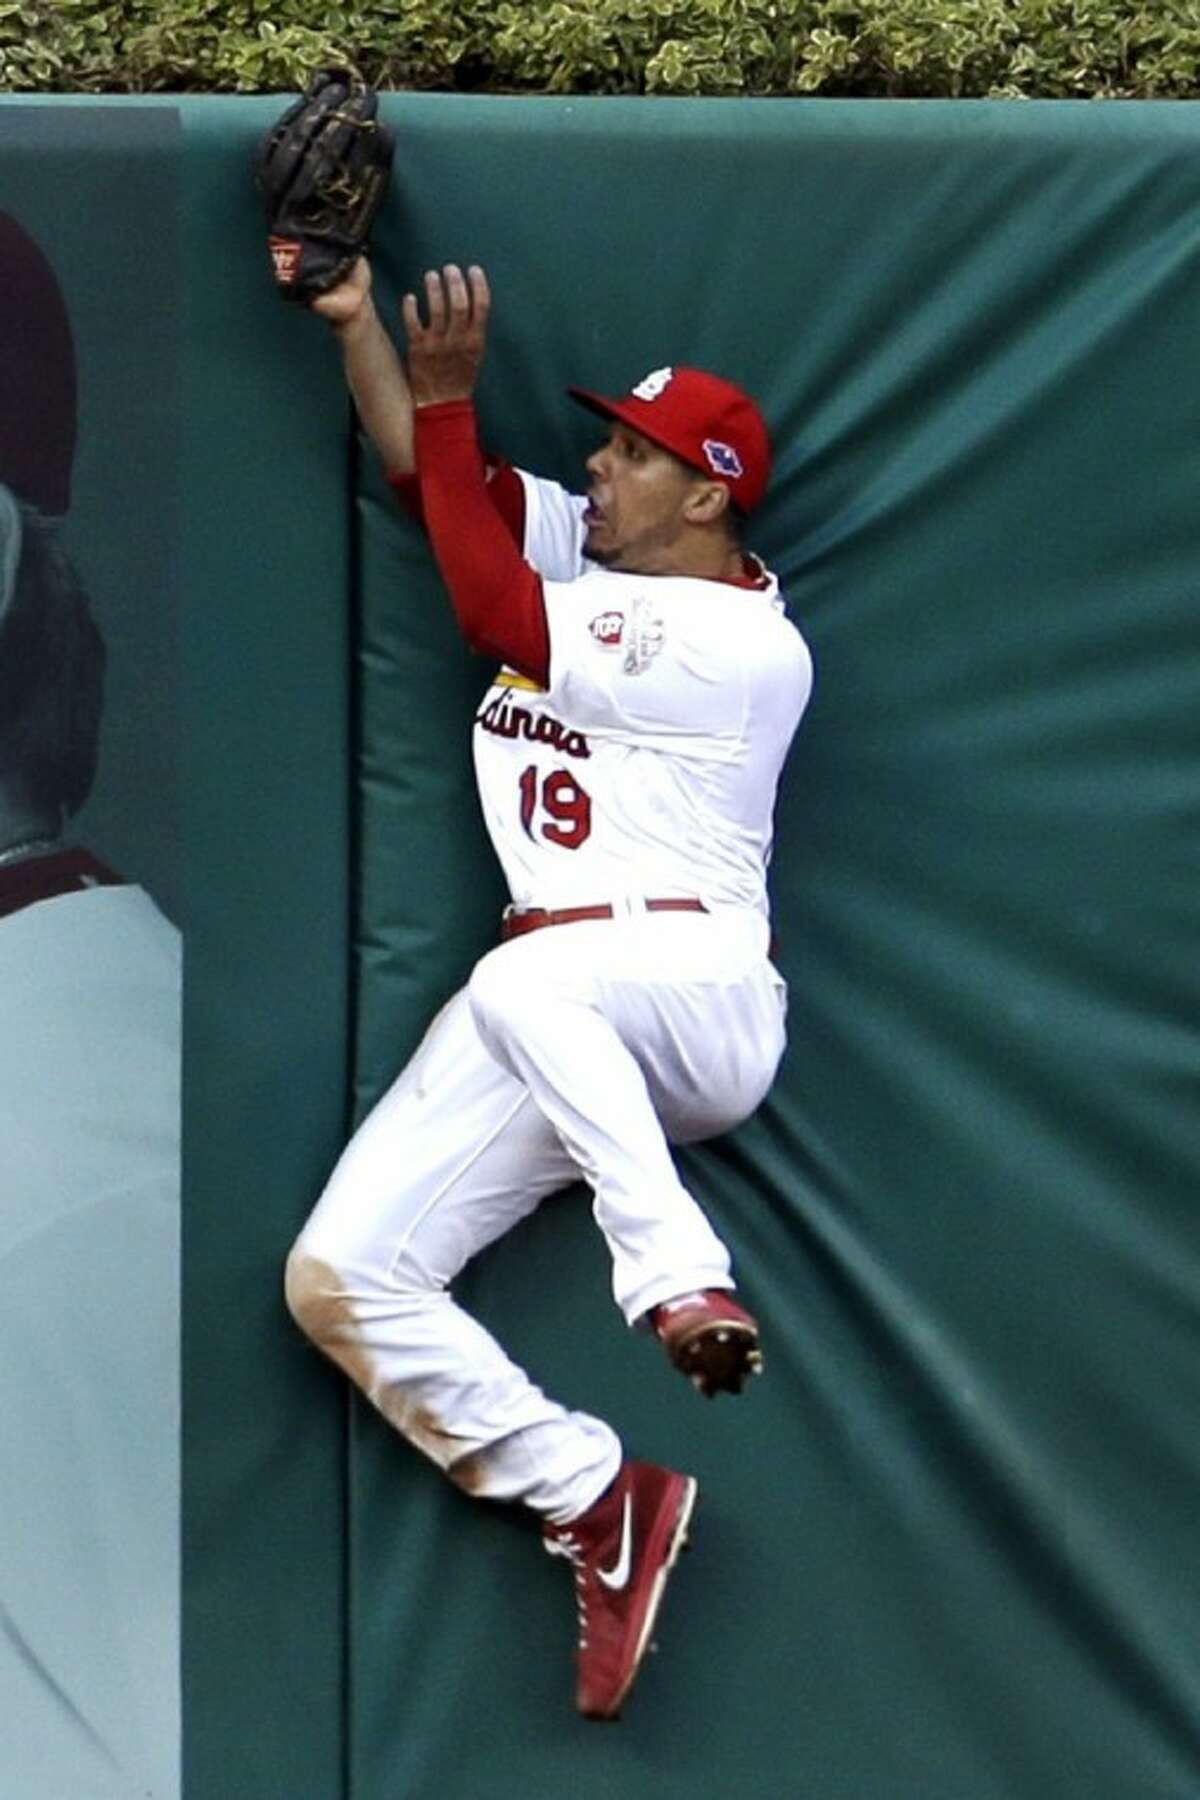 Cardinals center fielder Jon Jay hits the outfield wall after catching a ball hit by Washington’s Danny Espinosa in the NL playoffs. The Cards whipped the Nats 12-4.